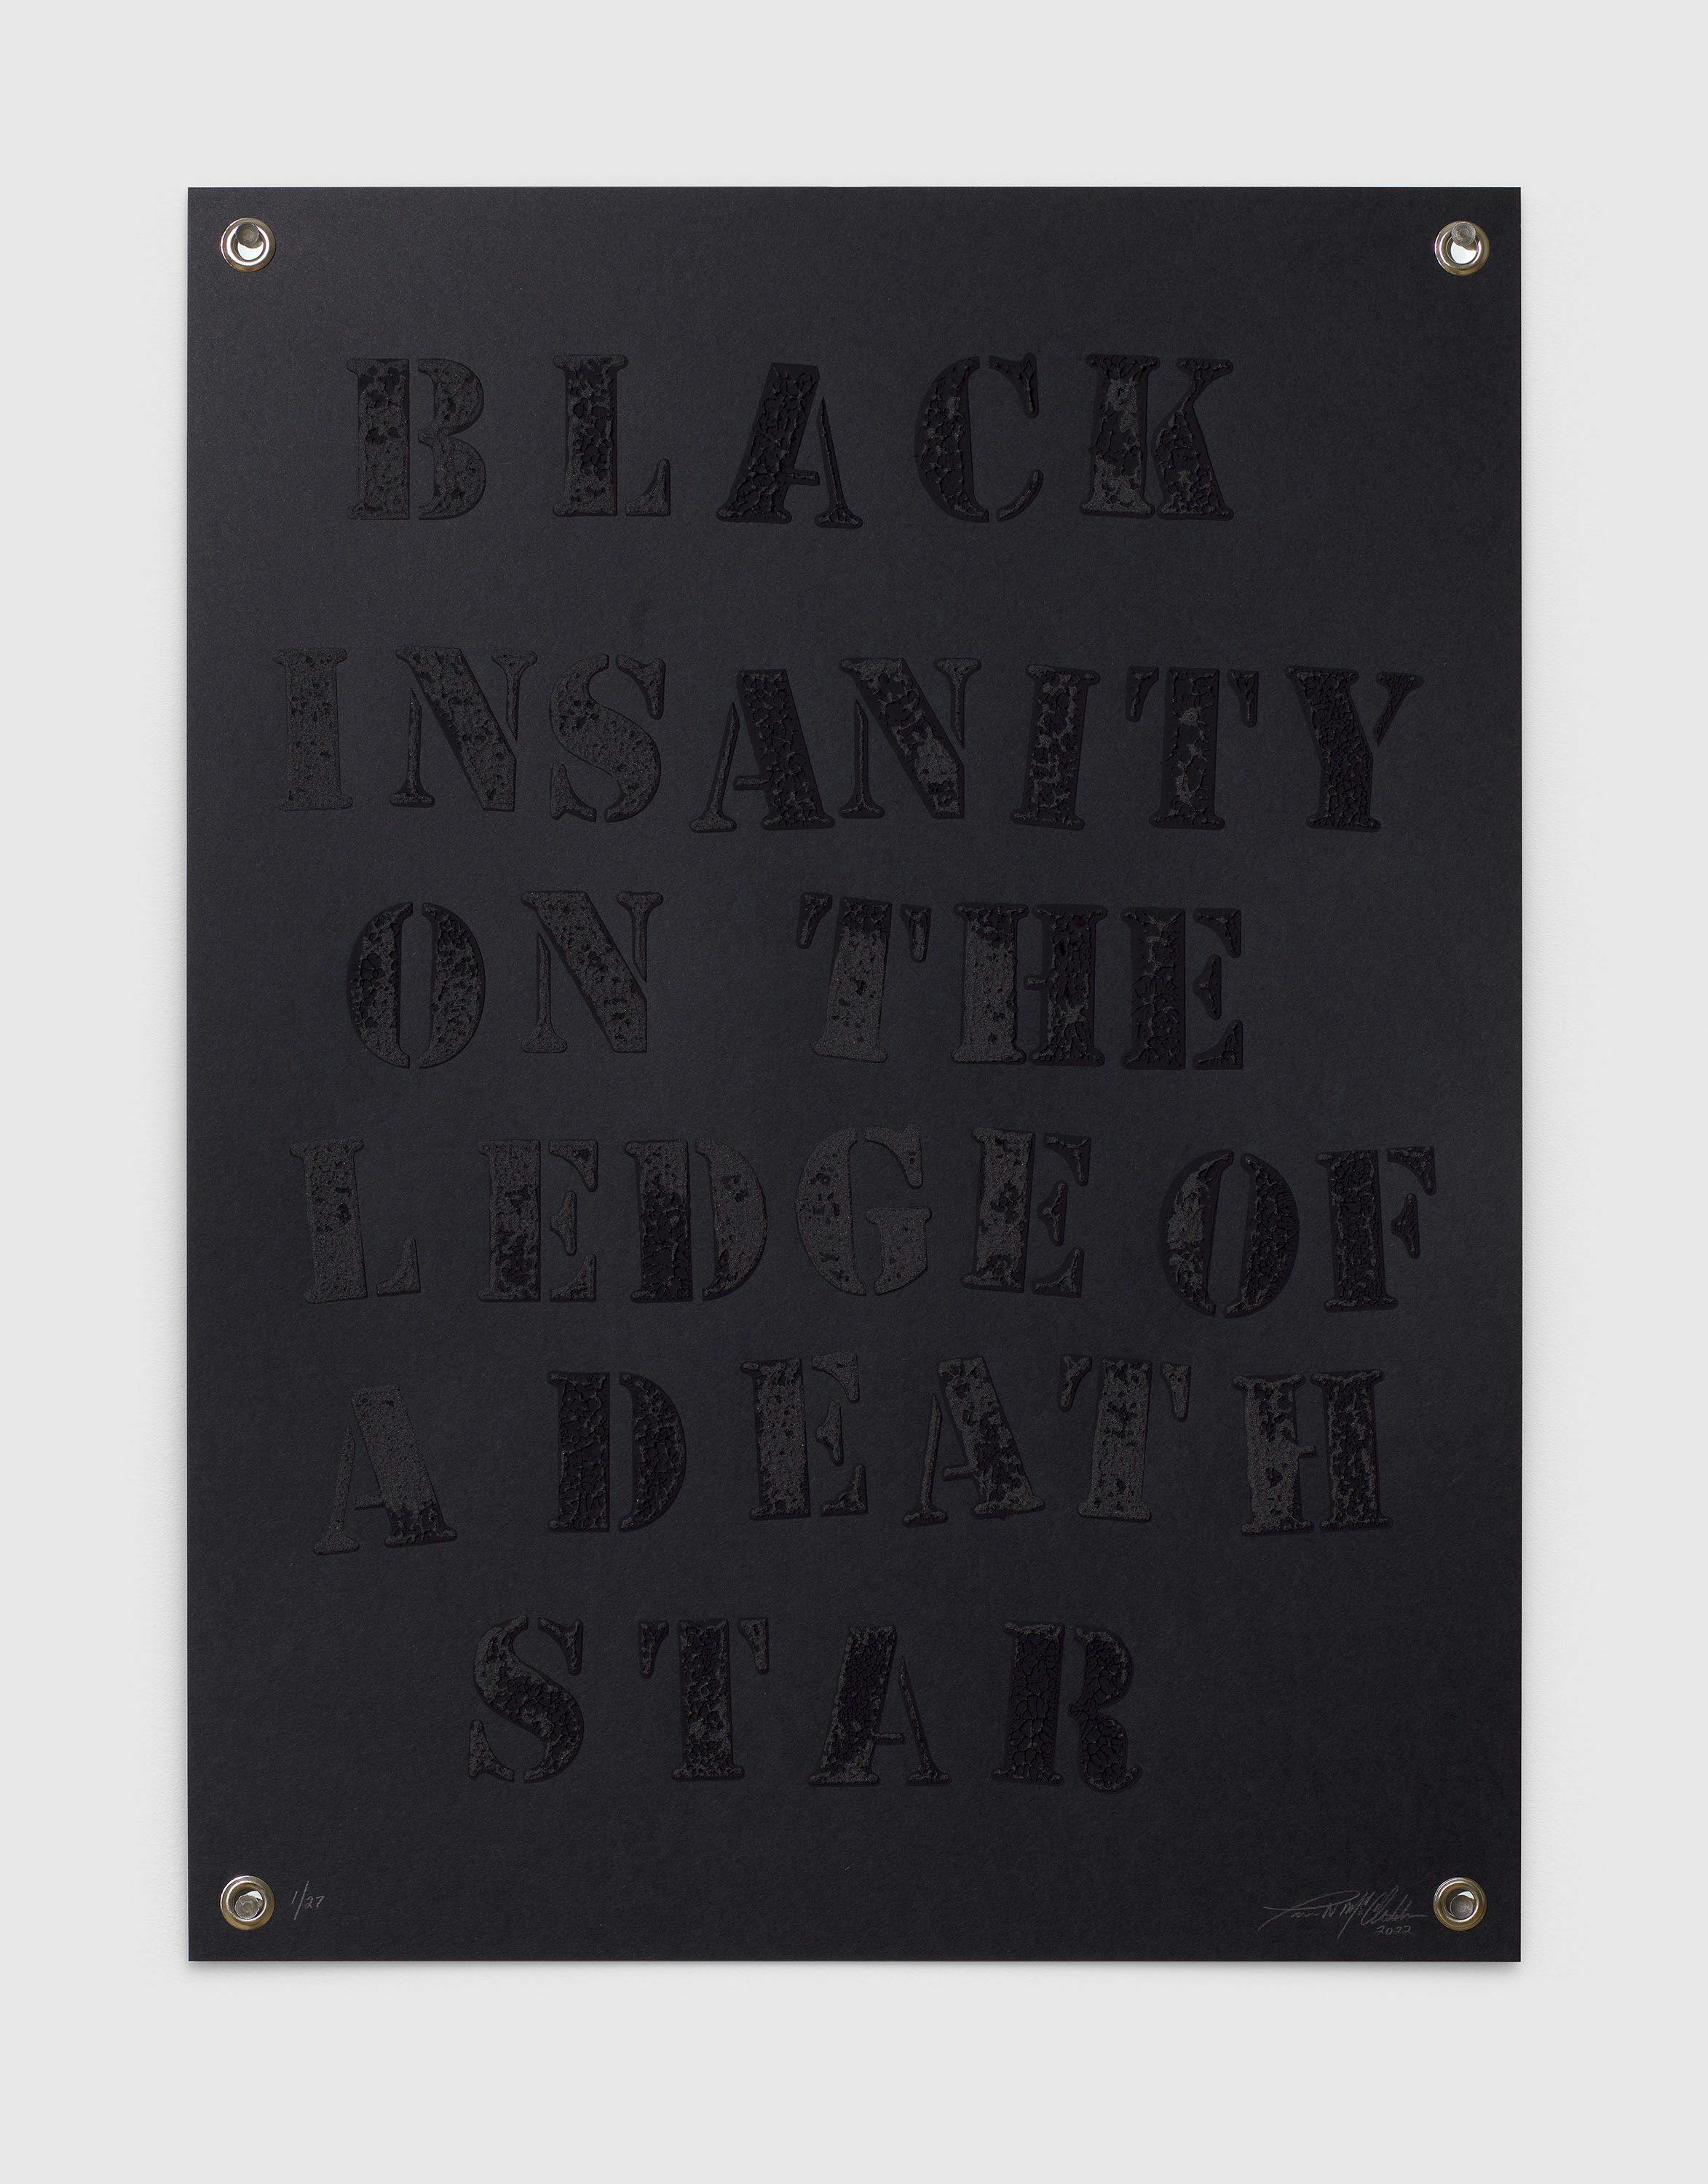 A print by Tiona Nekkia McClodden, titled BLACK INSANITY ON THE LEDGE OF A DEATH STAR, dated 2022.